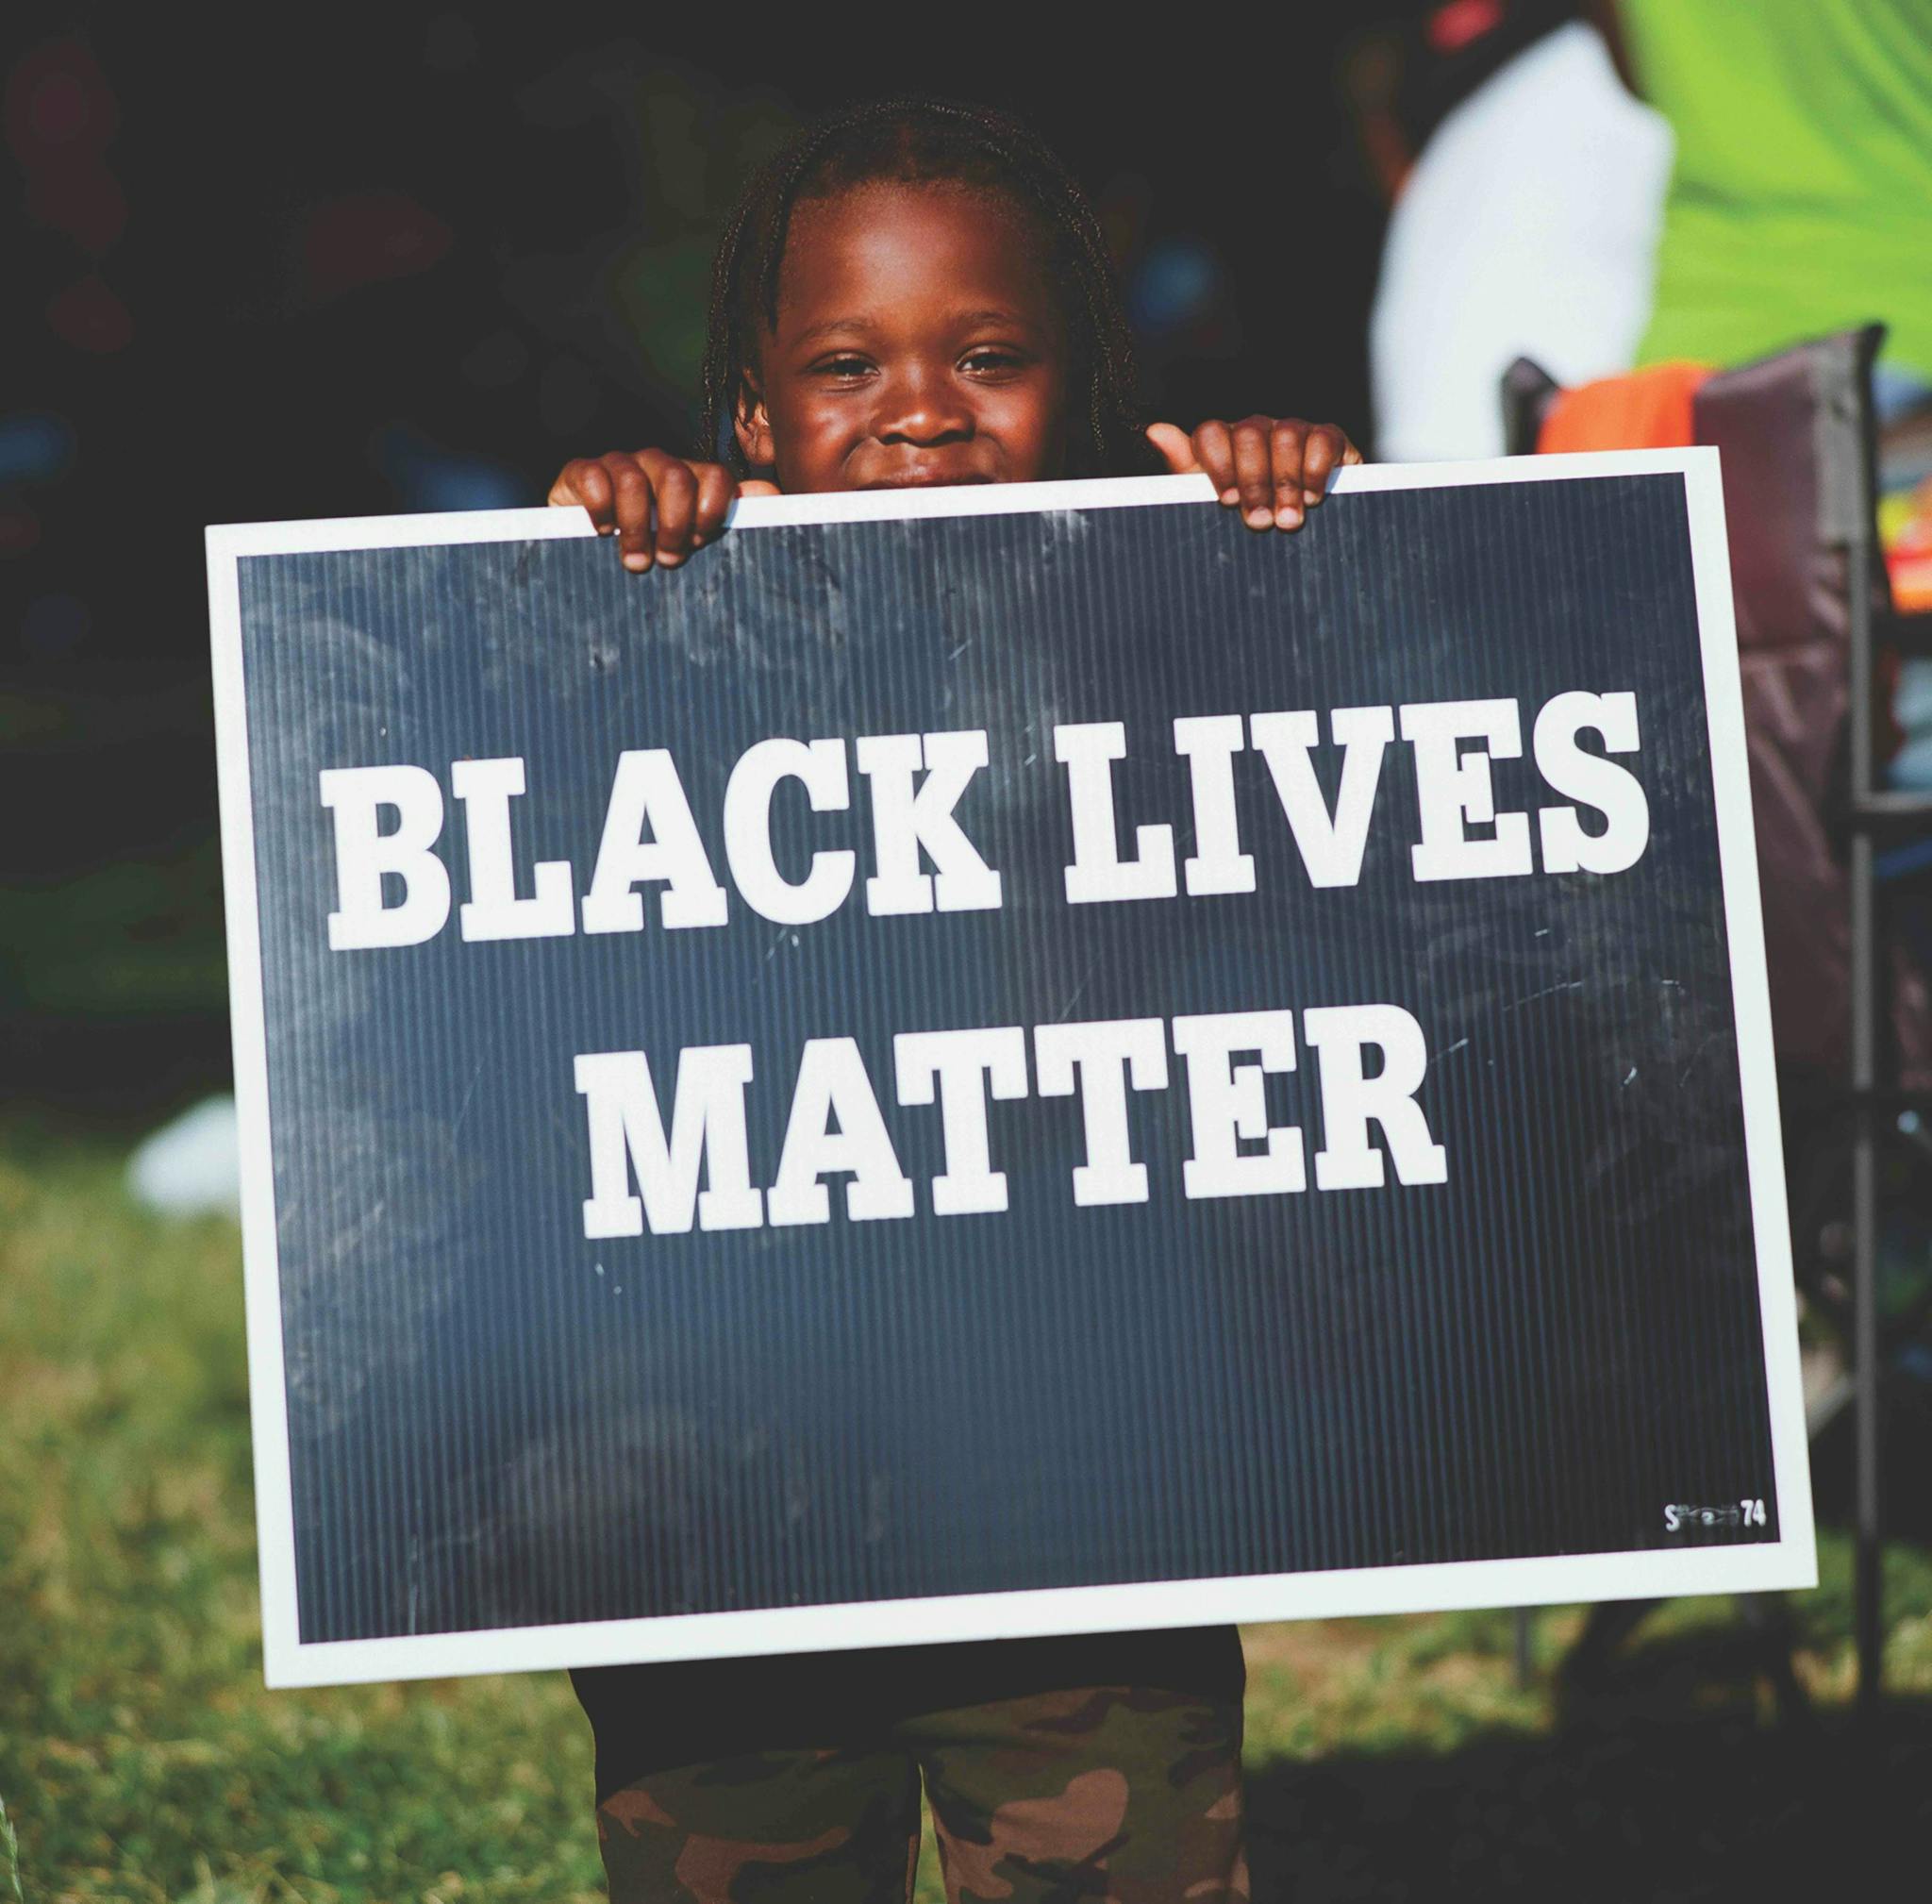 A child holds up a Black Lives Matter sign, while standing on green grass.